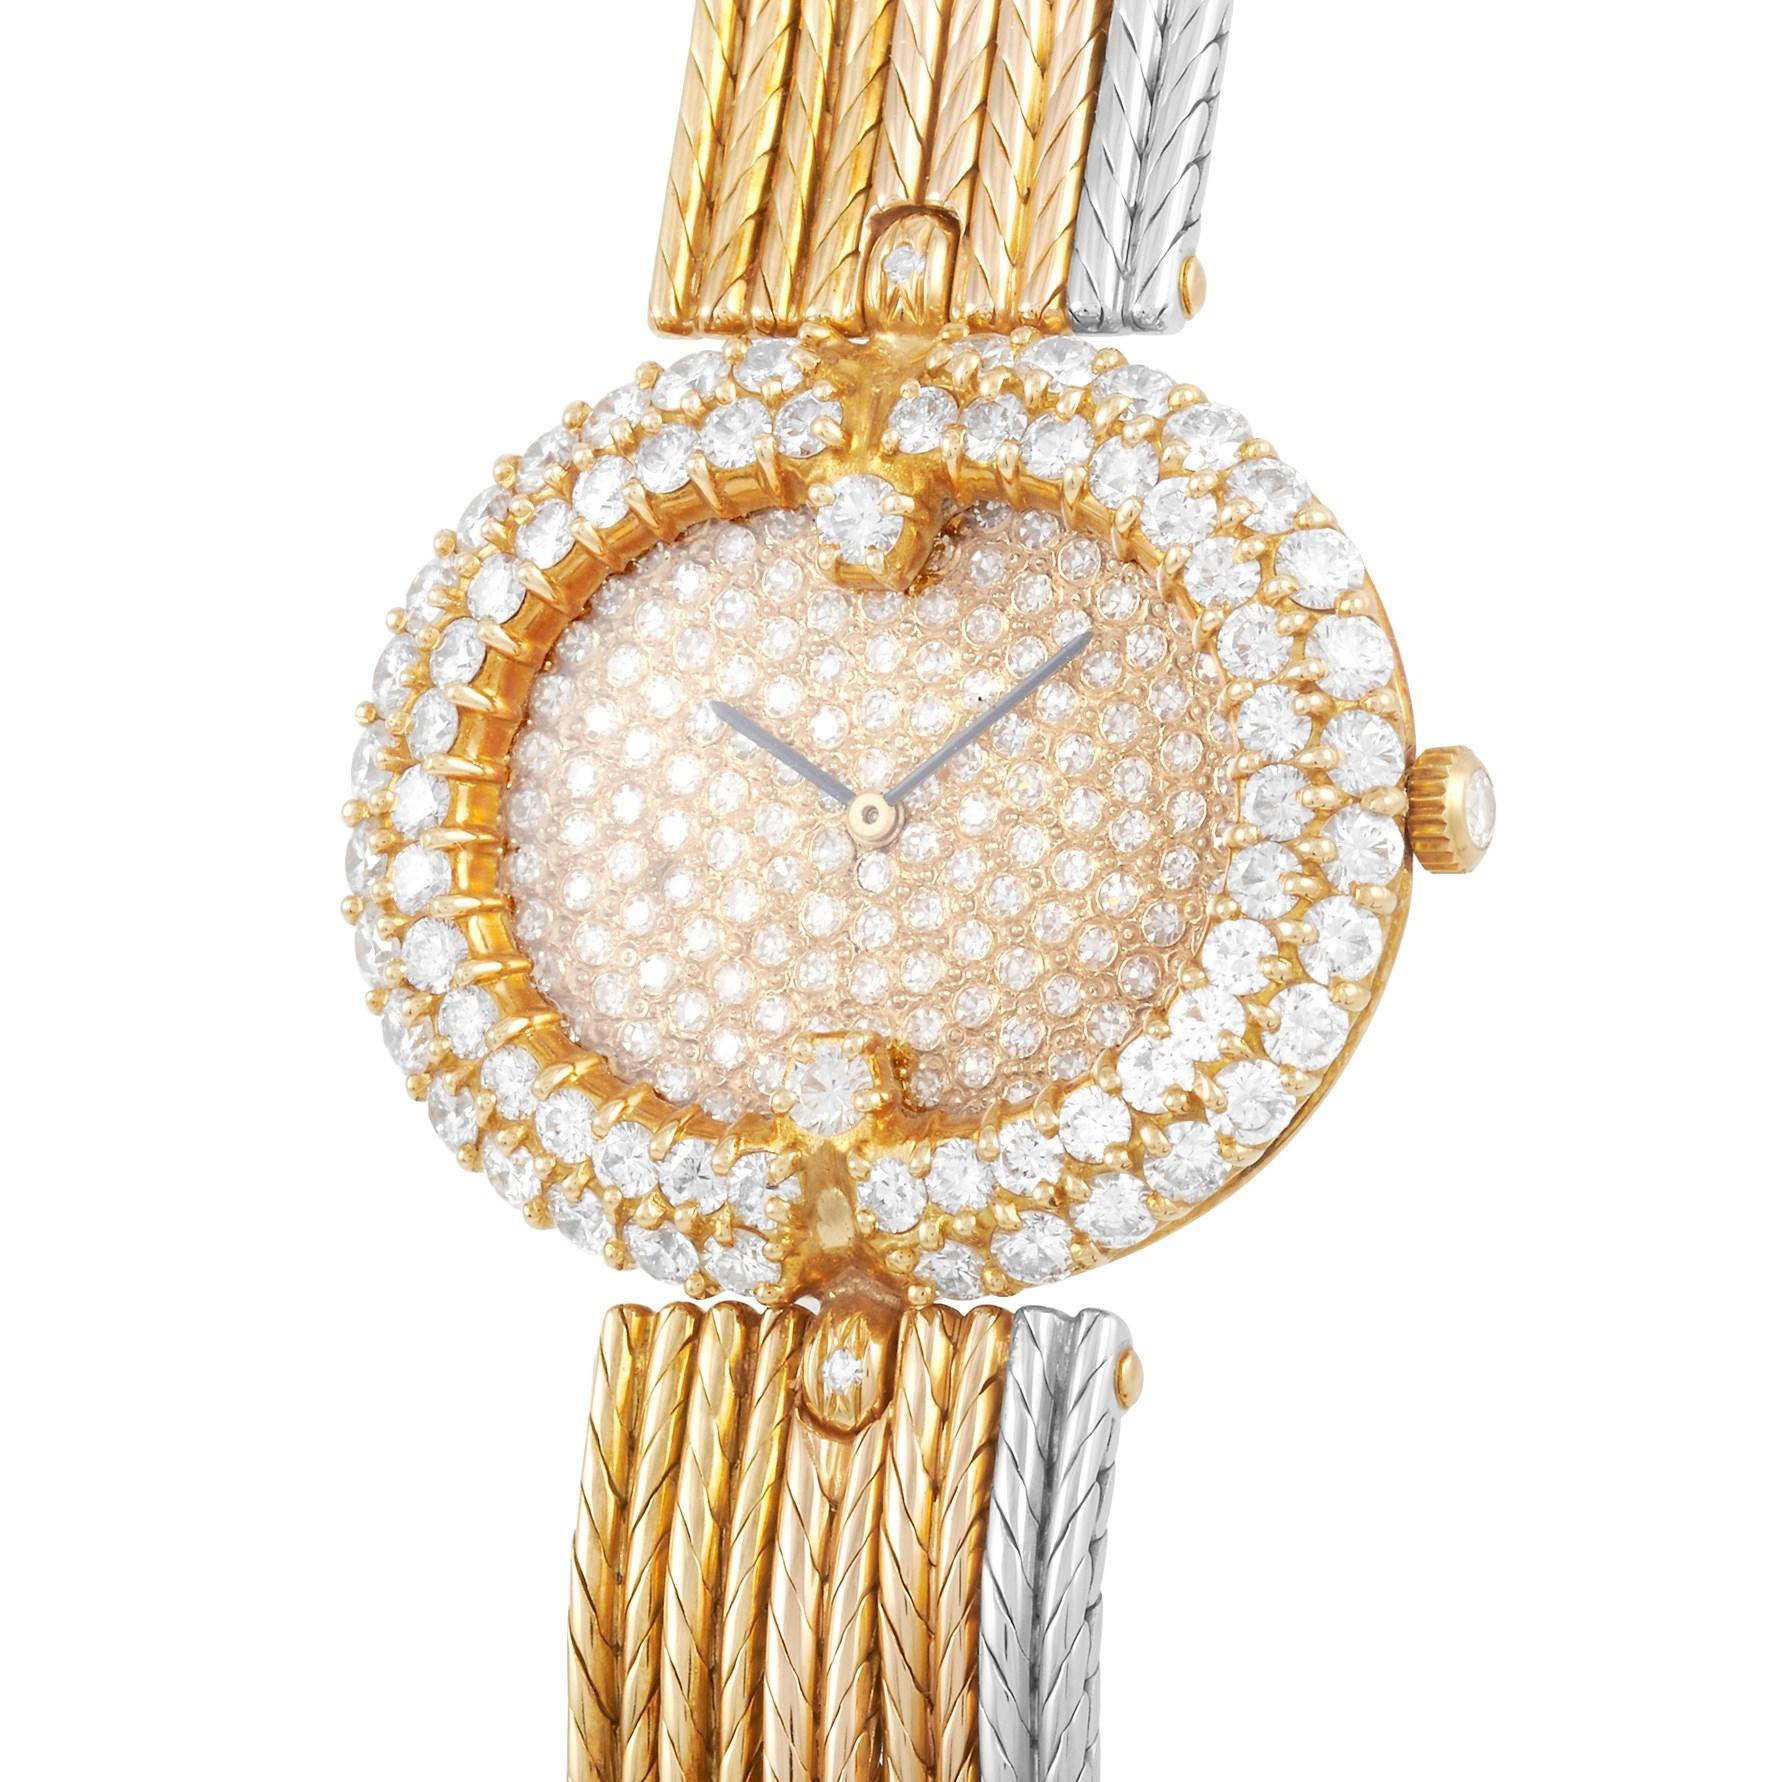 This is a very special watch that was made for the Sultan of Oman by Gerald Genta and Royama. The unique piece is presented in 18K yellow and white gold, and features a two row diamond bezel. The case is presented on a matching 18K yellow and white